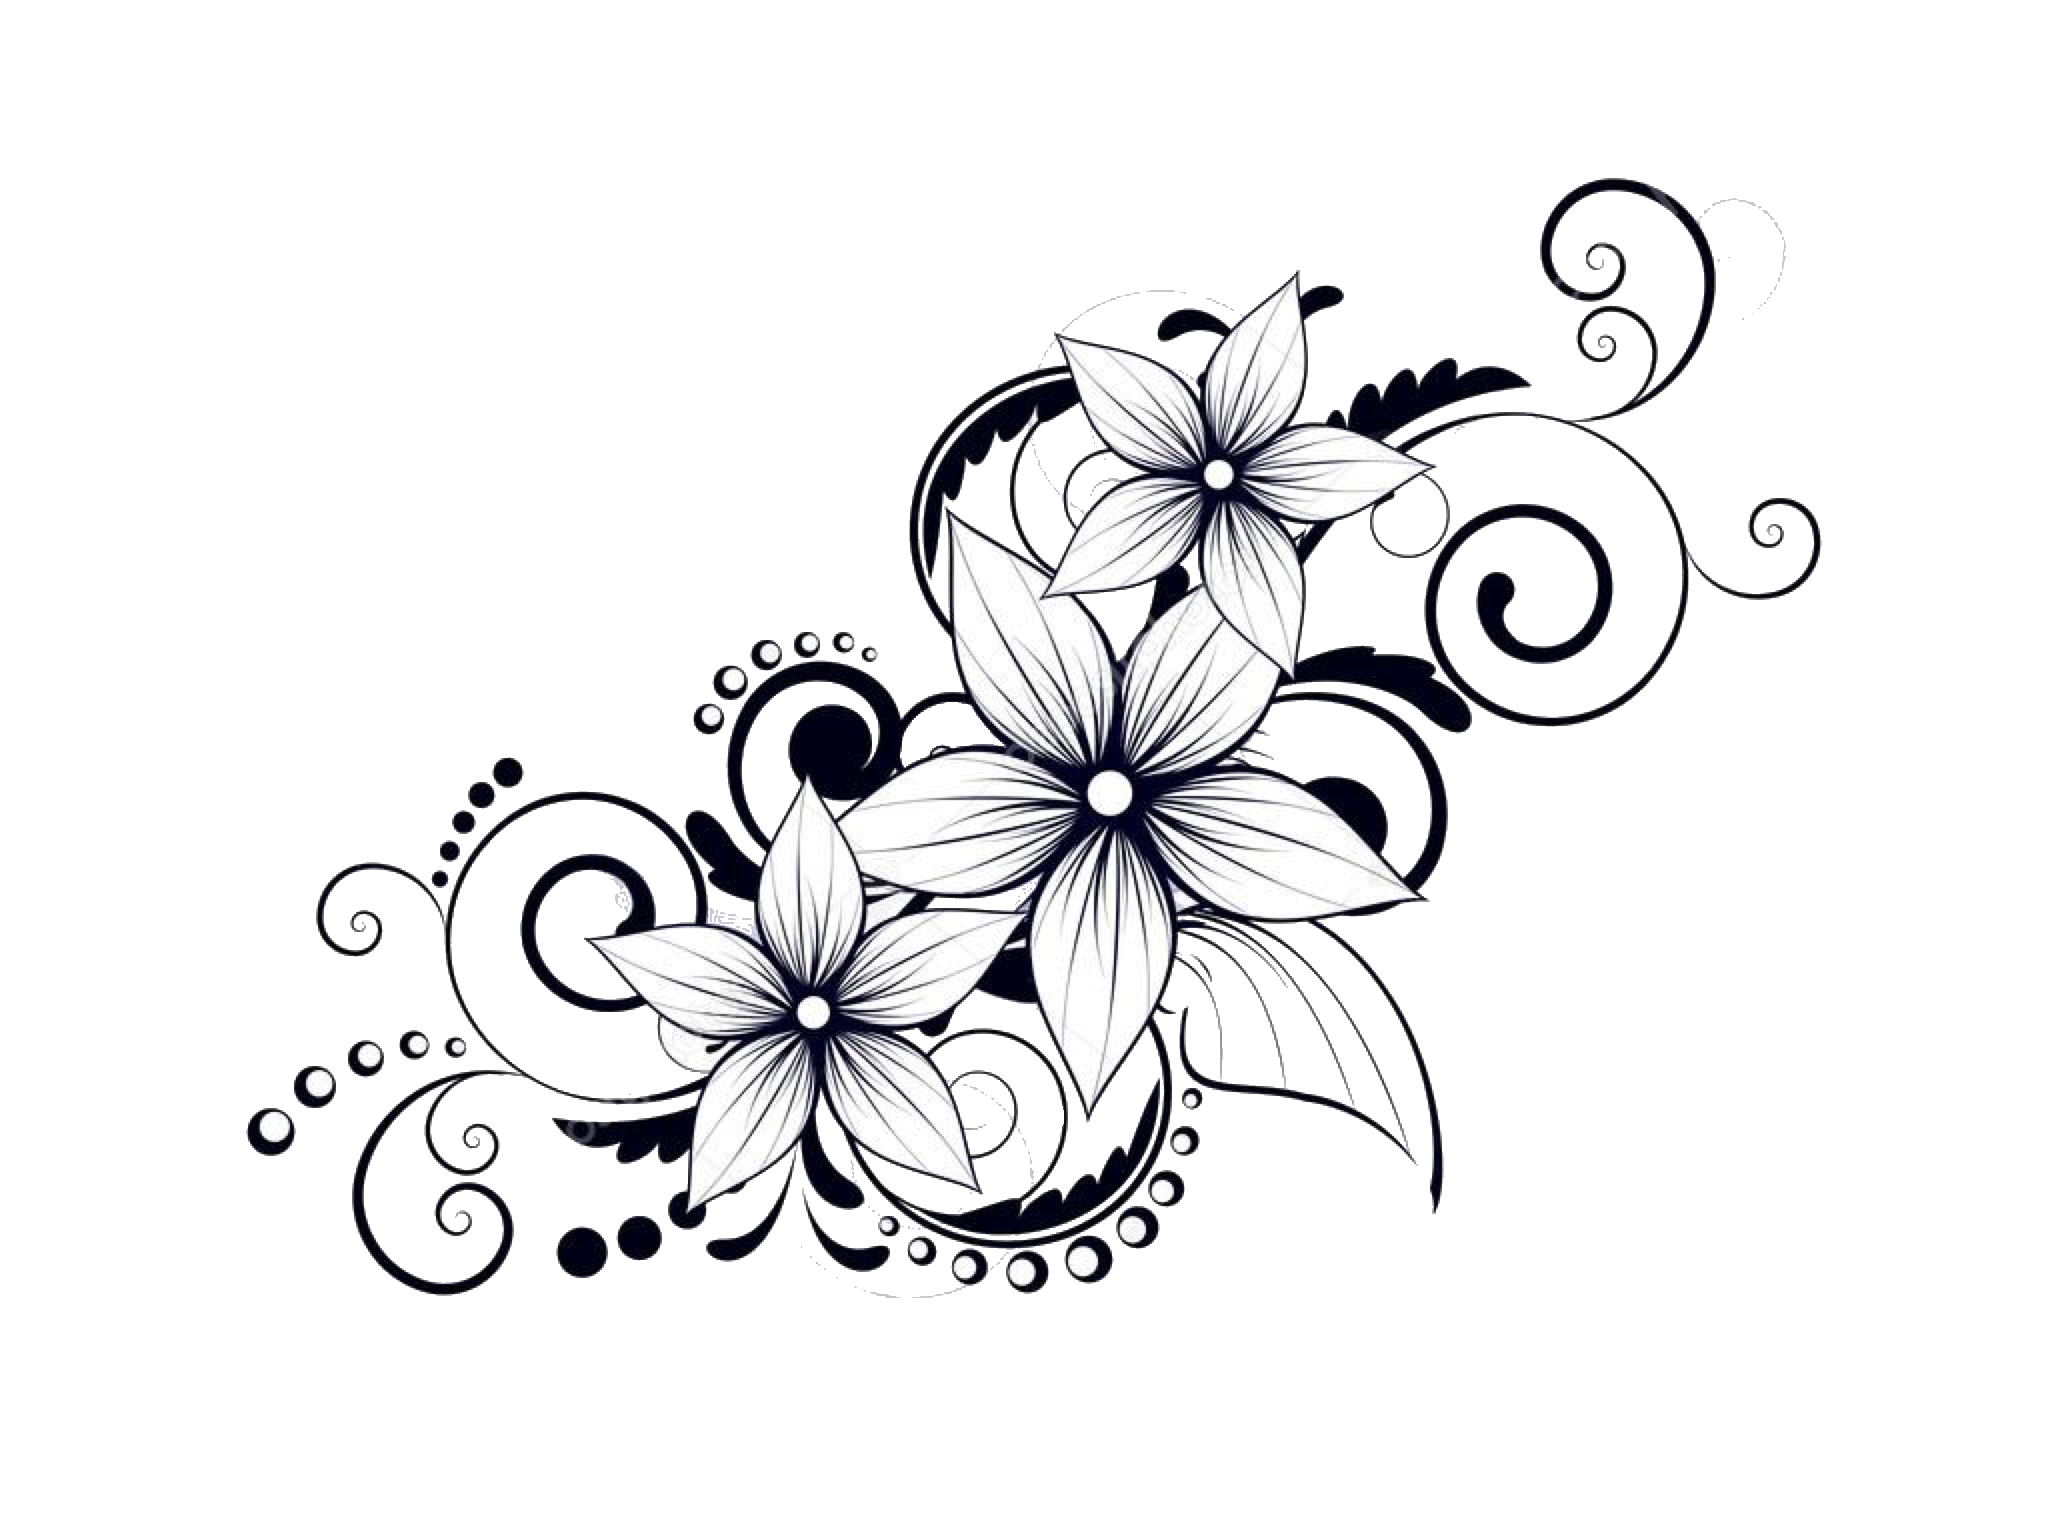 This visual is about flower tattoo freetoedit #flower #tattoo#FreeToEdit.